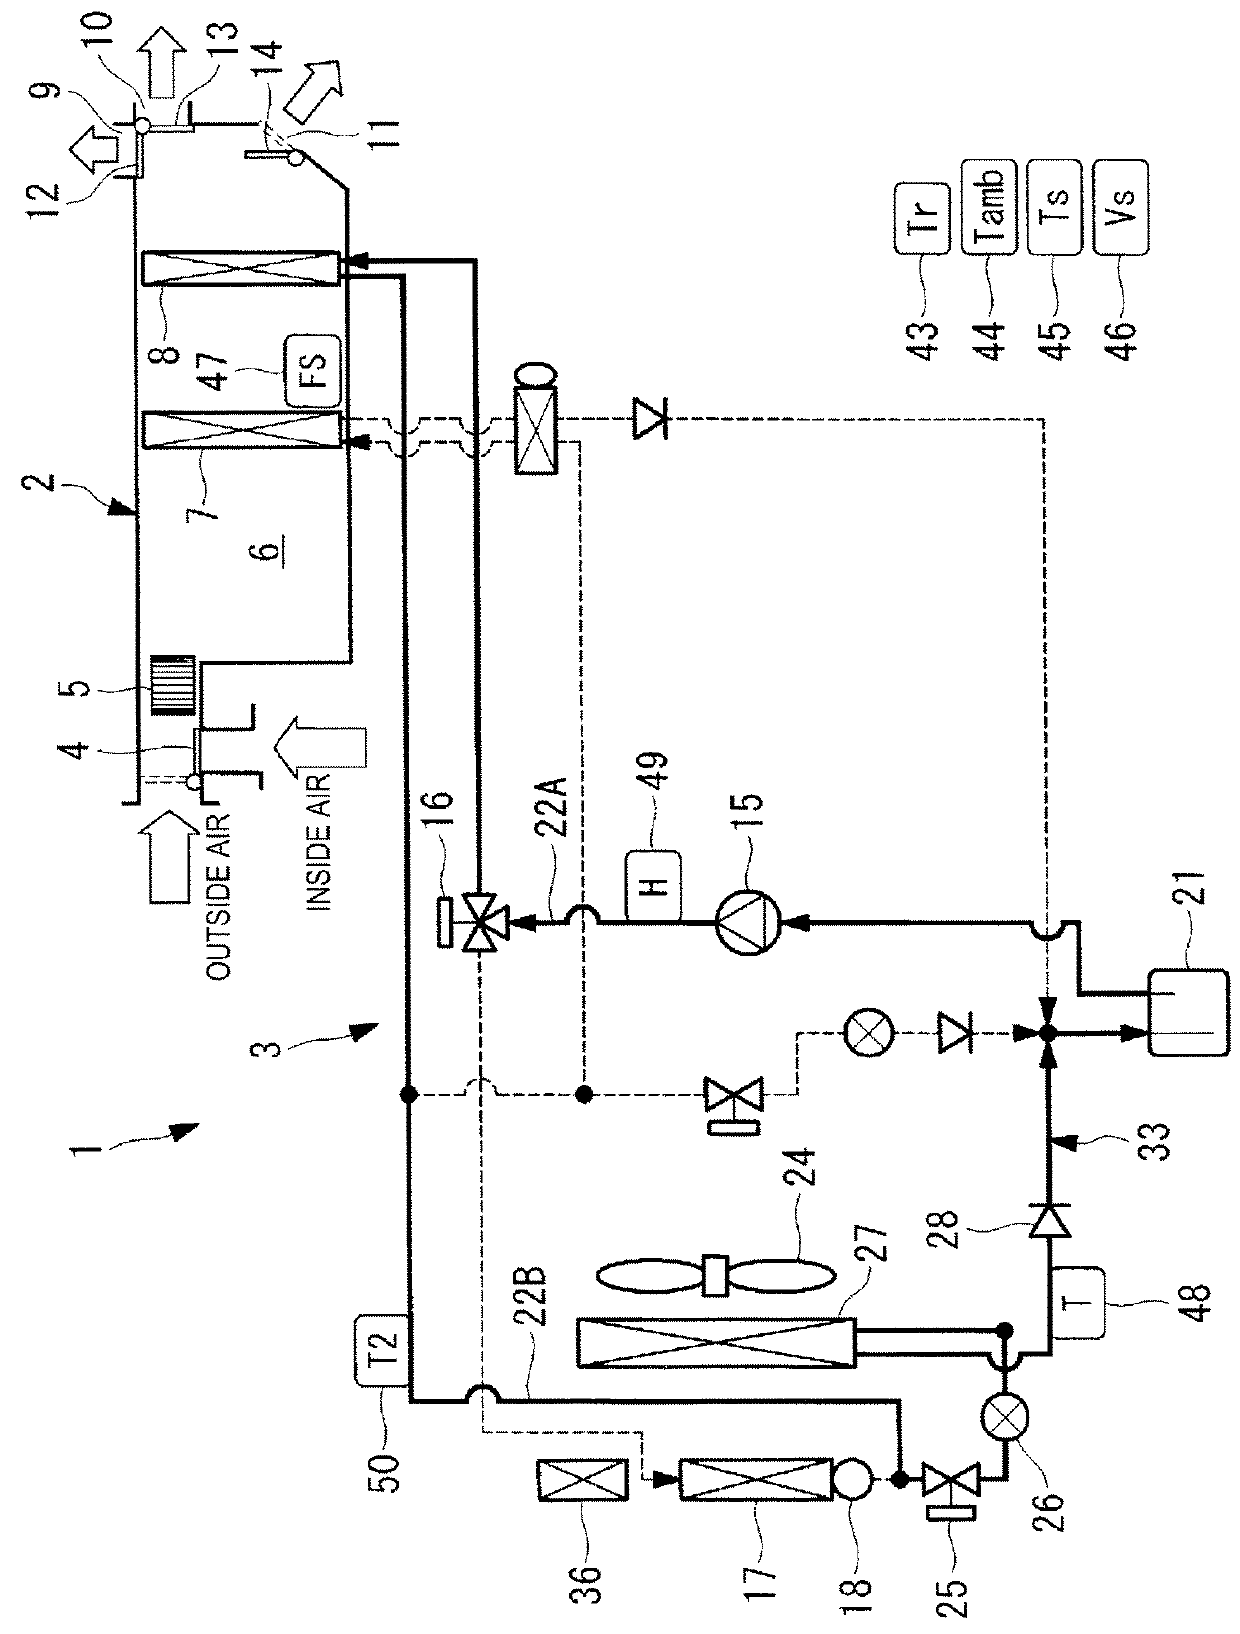 Heat-pump-type vehicle air conditioning system and defrosting method thereof